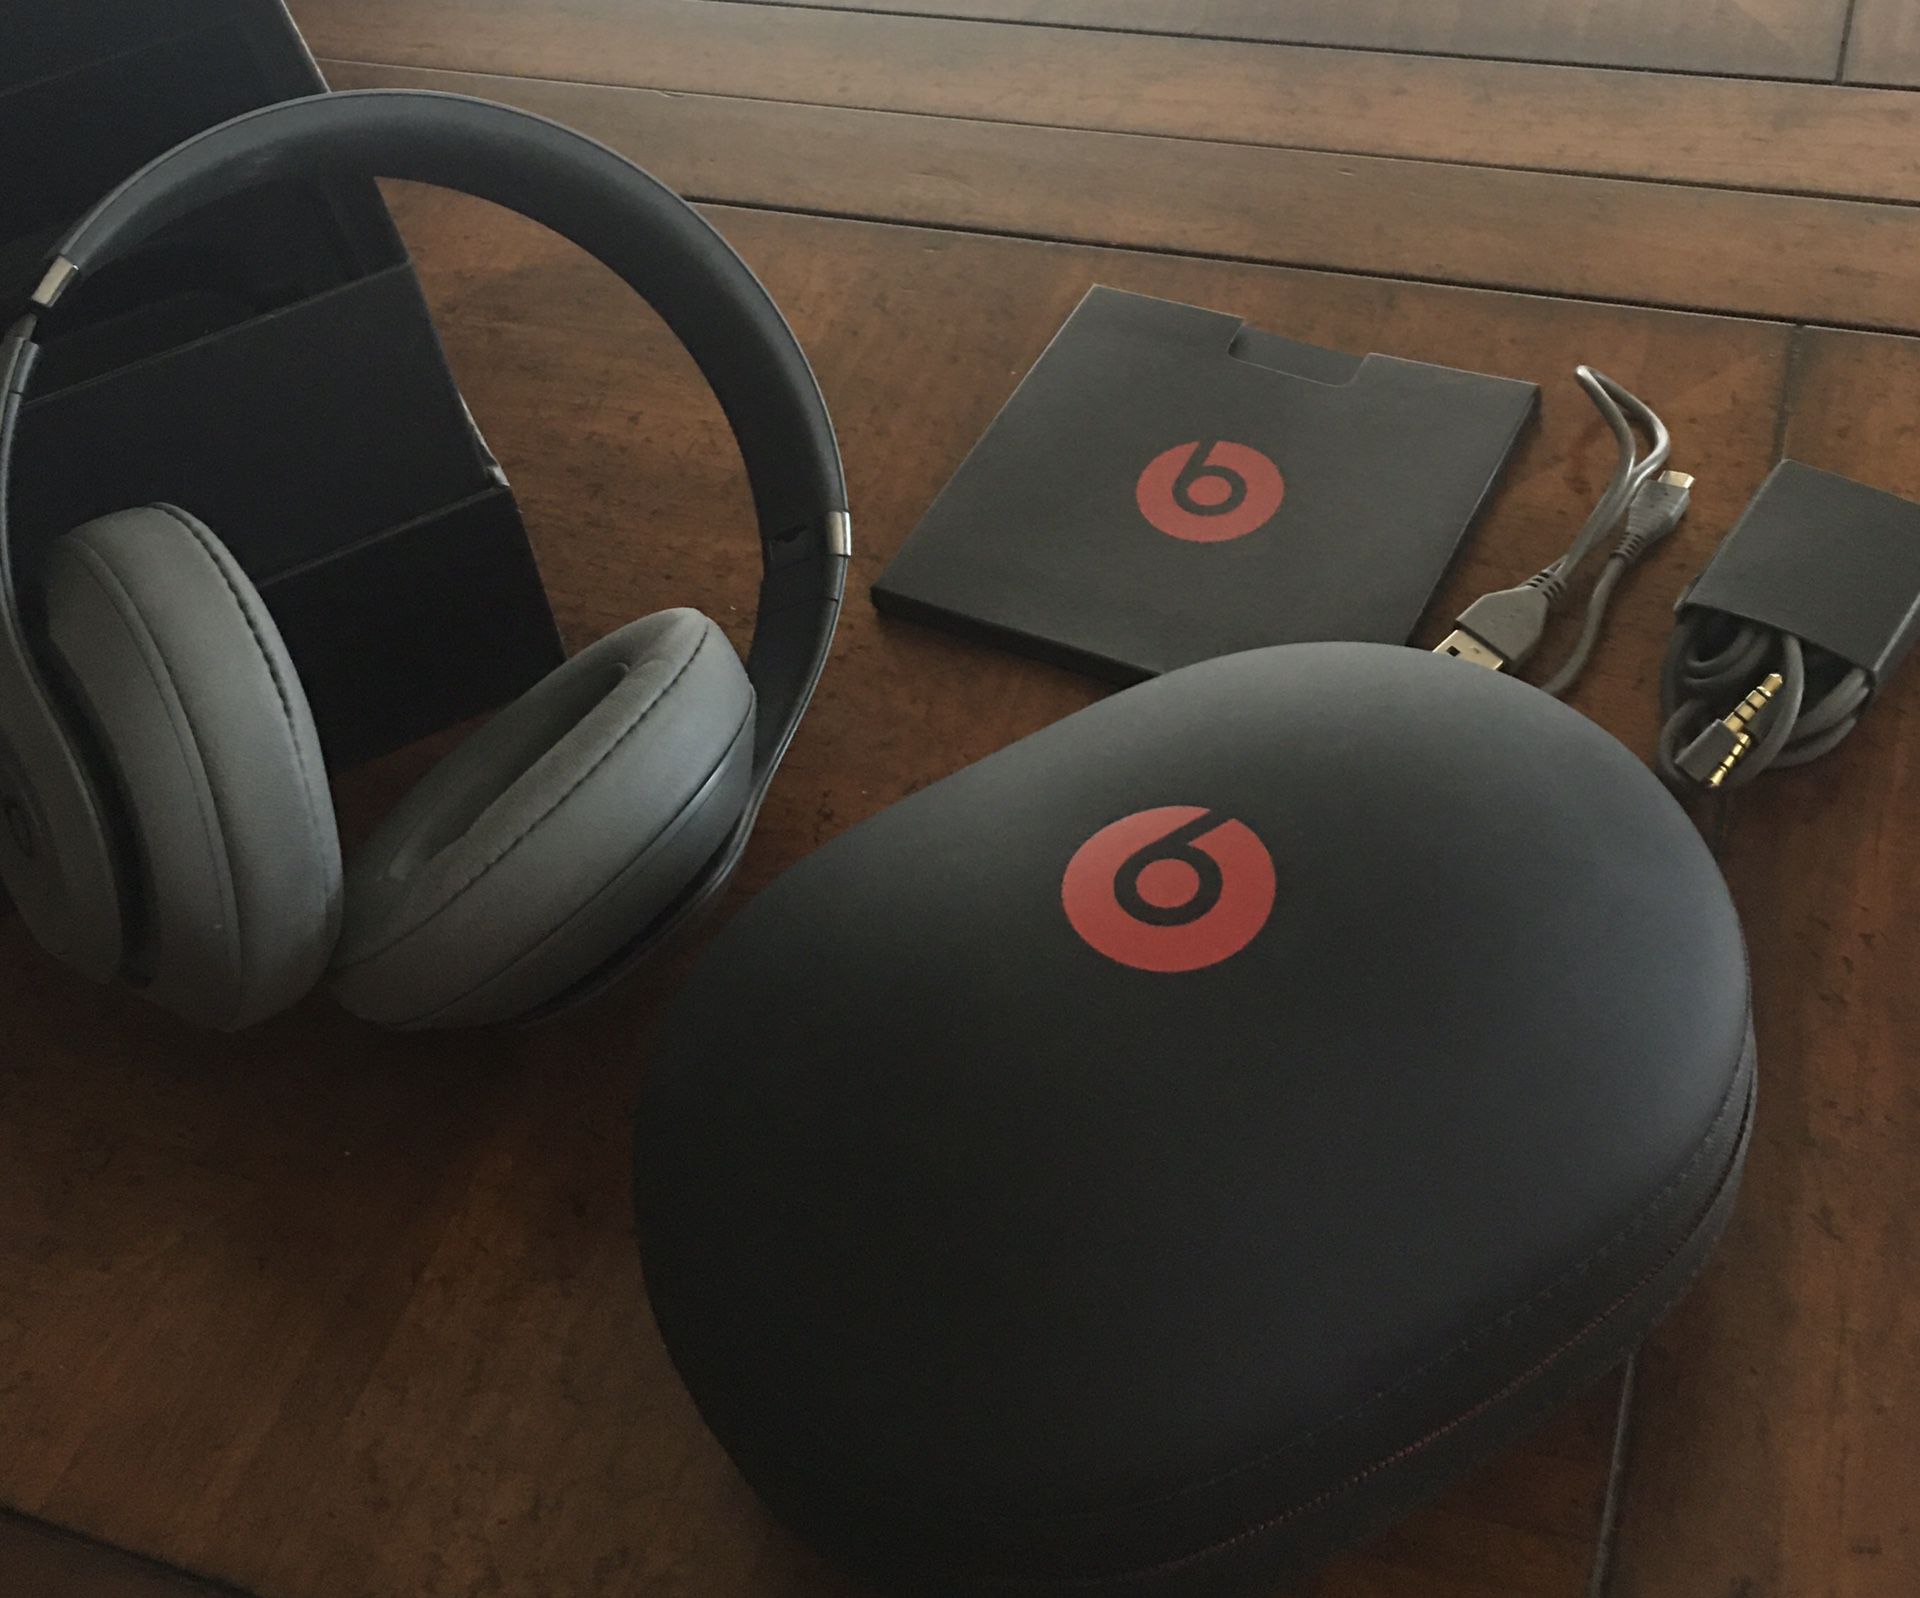 Brand new Beats head phones with case and chargers. Never used.